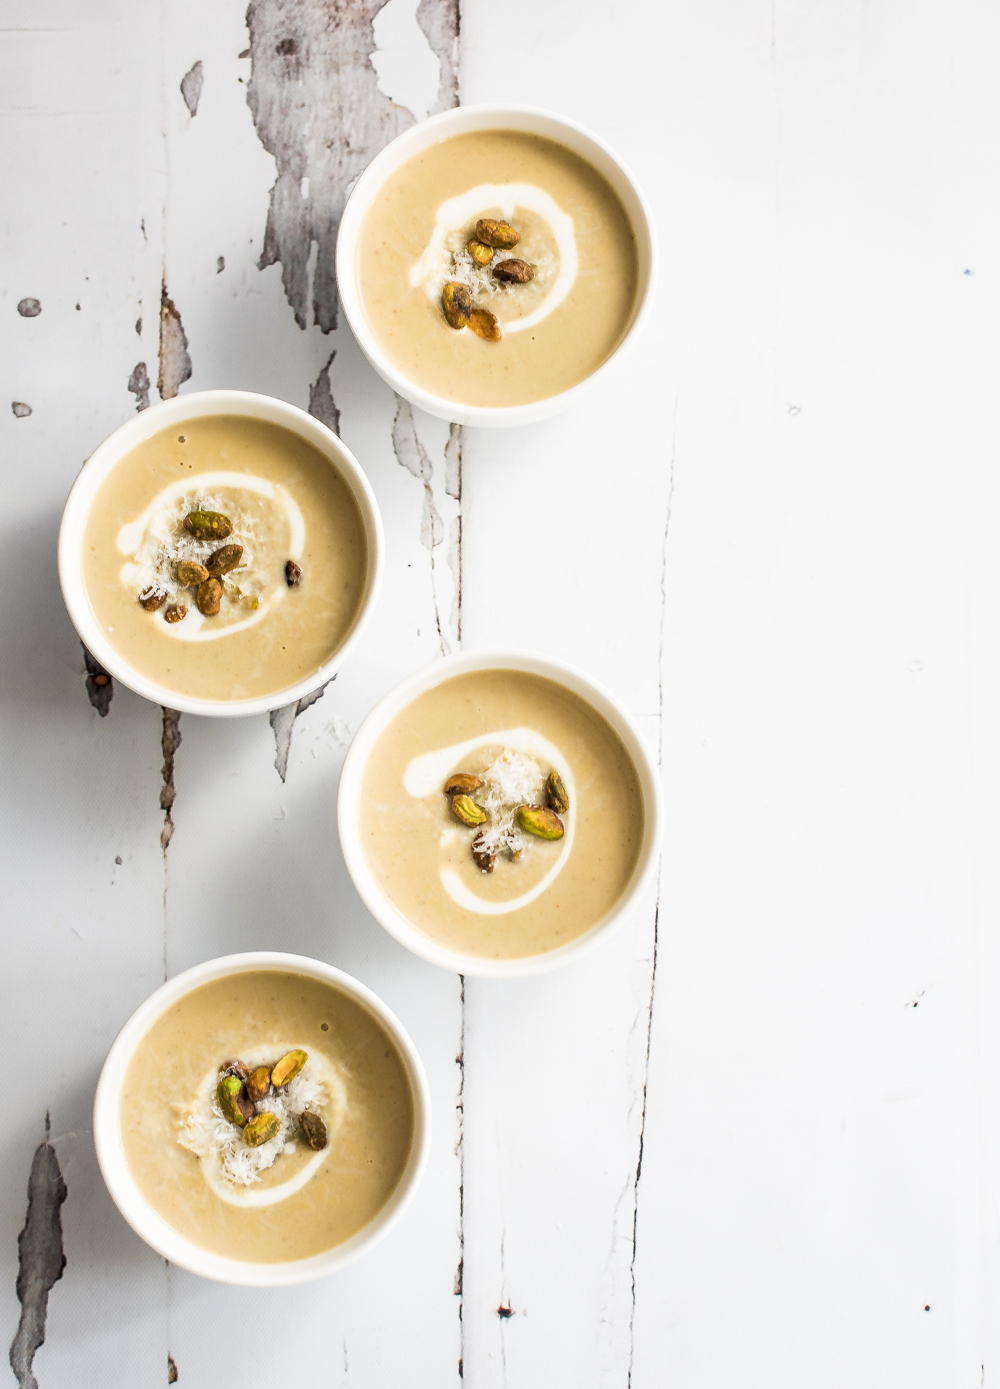 Soup isn't just for the wintertime. This creamy spring cauliflower and pistachio soup is just bursting with bright spring and summer flavors!